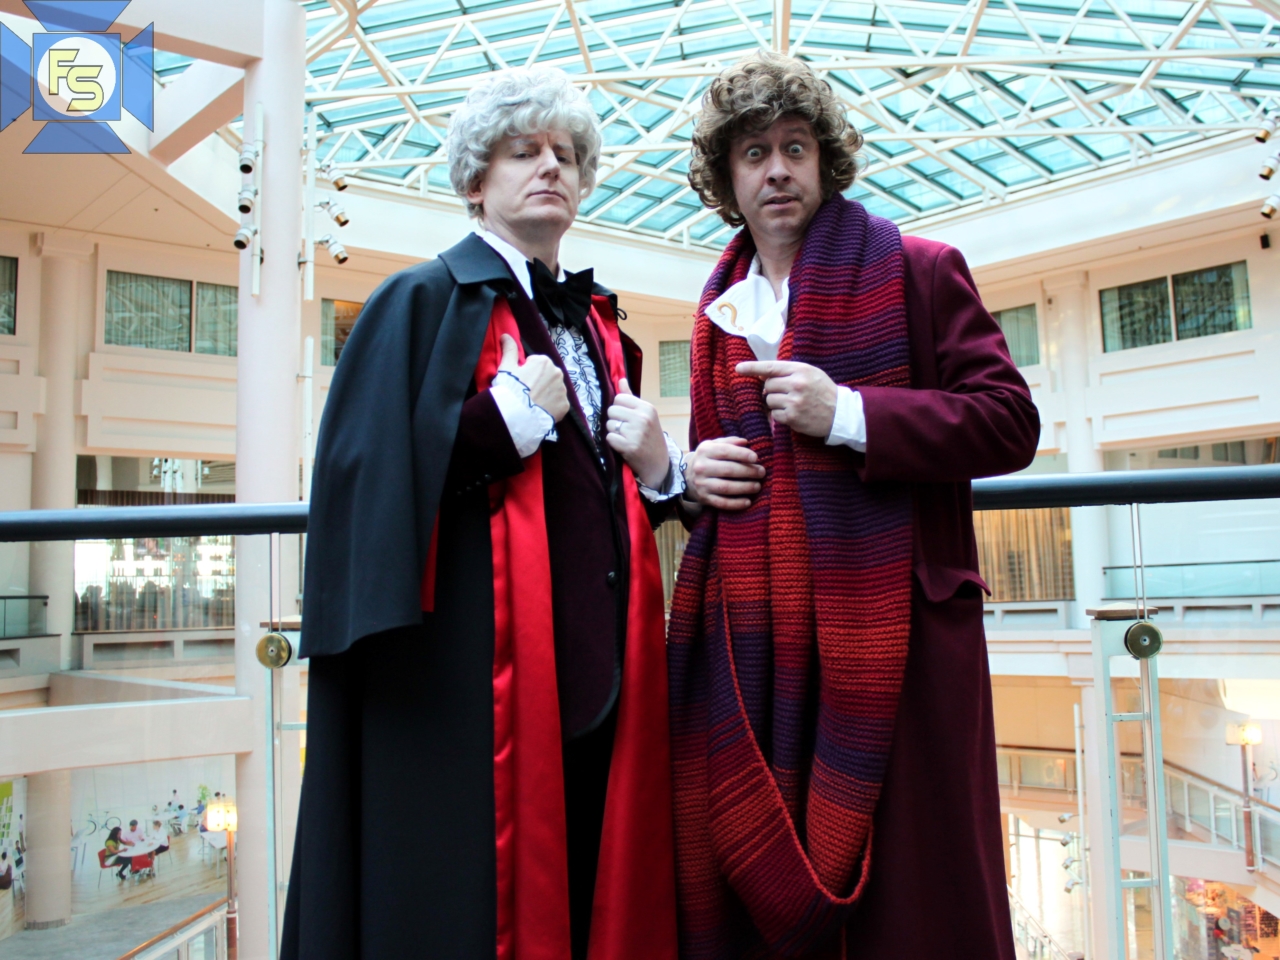 The Third and Fourth Doctors